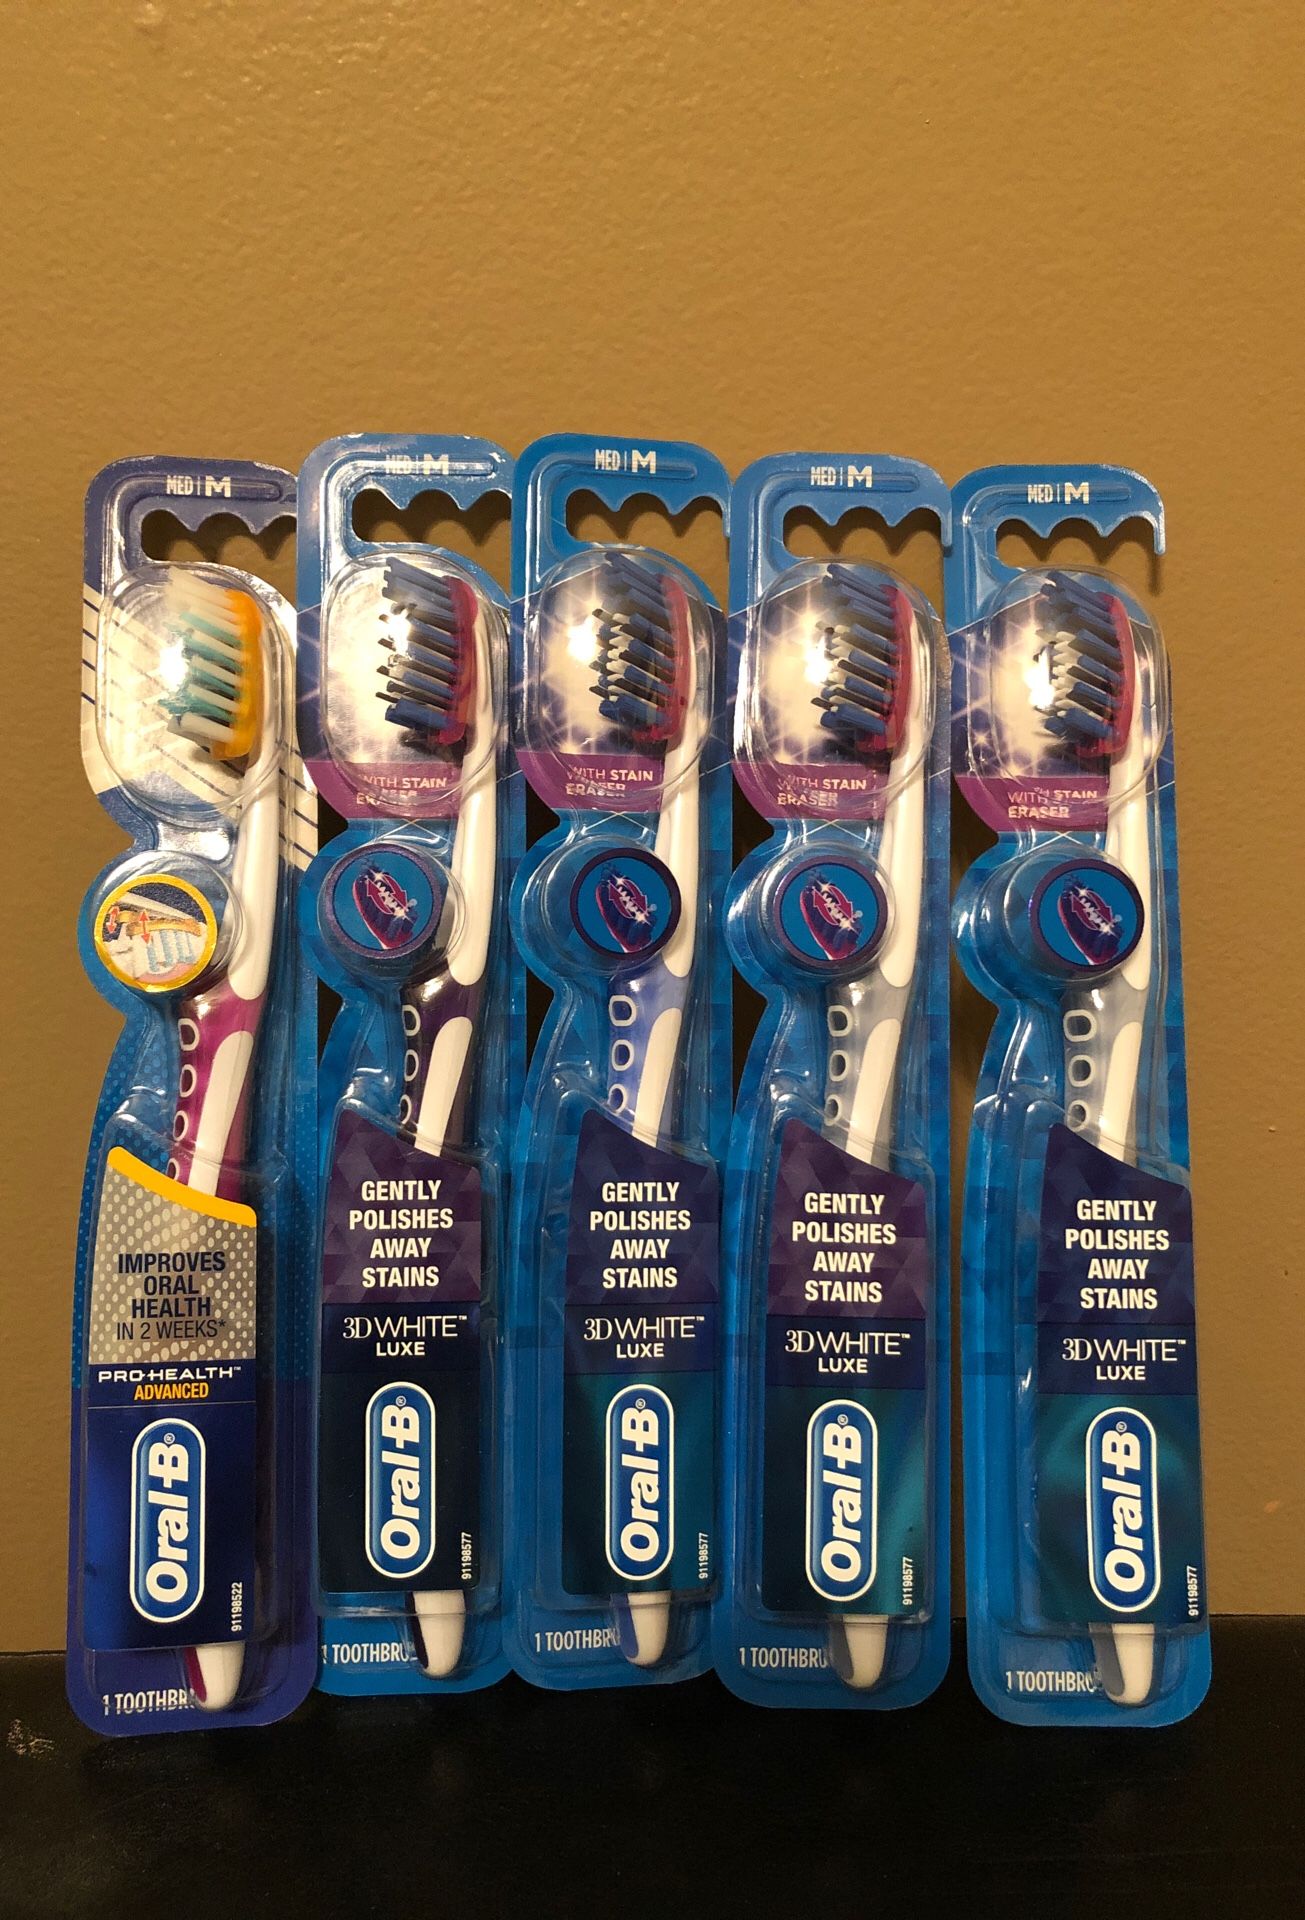 Oral-B toothbrushes $2 each